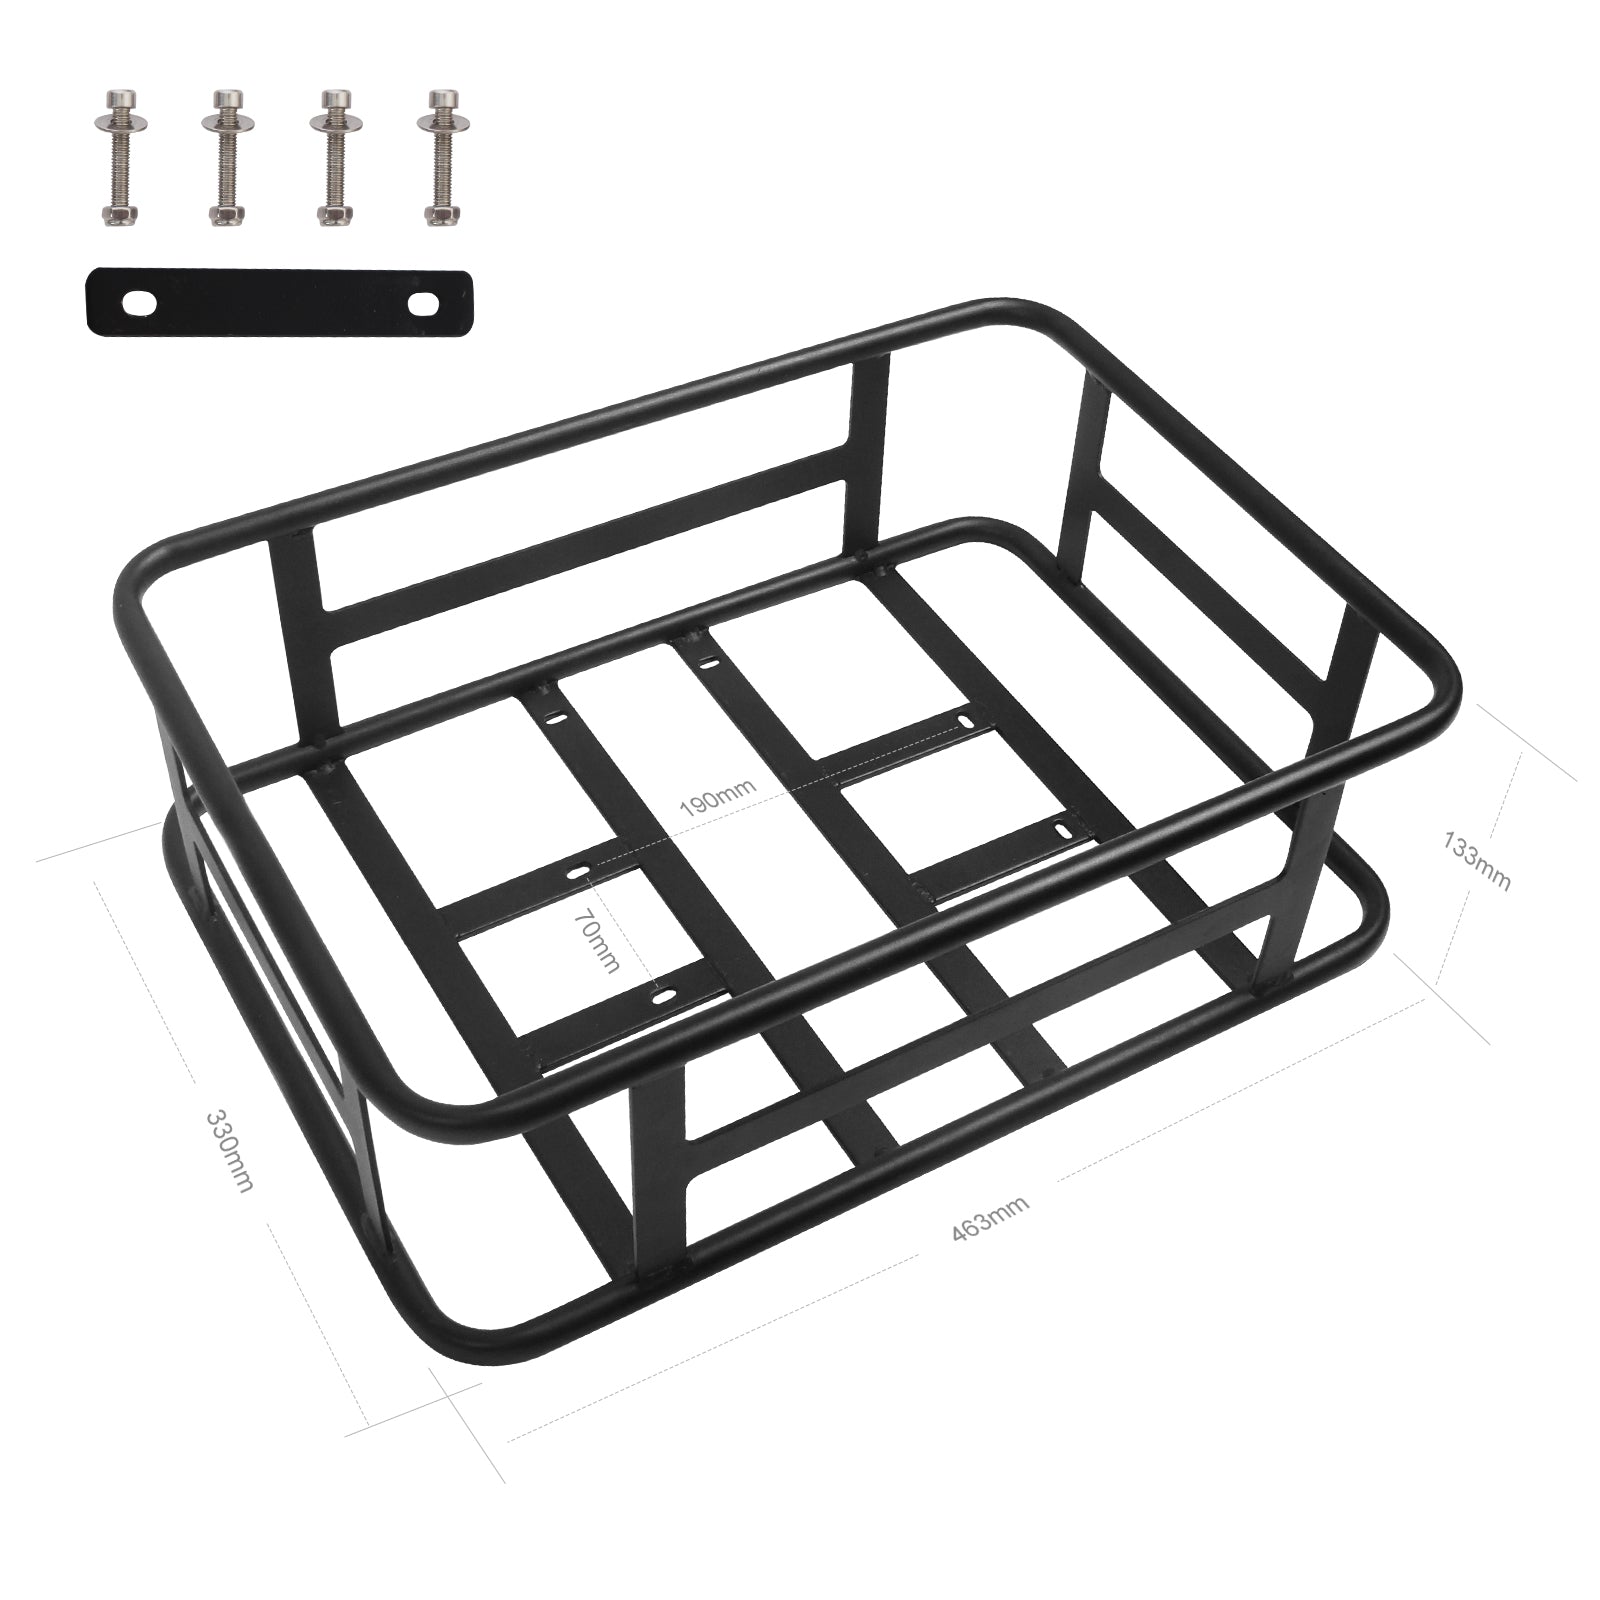 Rear Basket for FW11 /FW11 S 4.0 and FW11 /FW11S 3.0